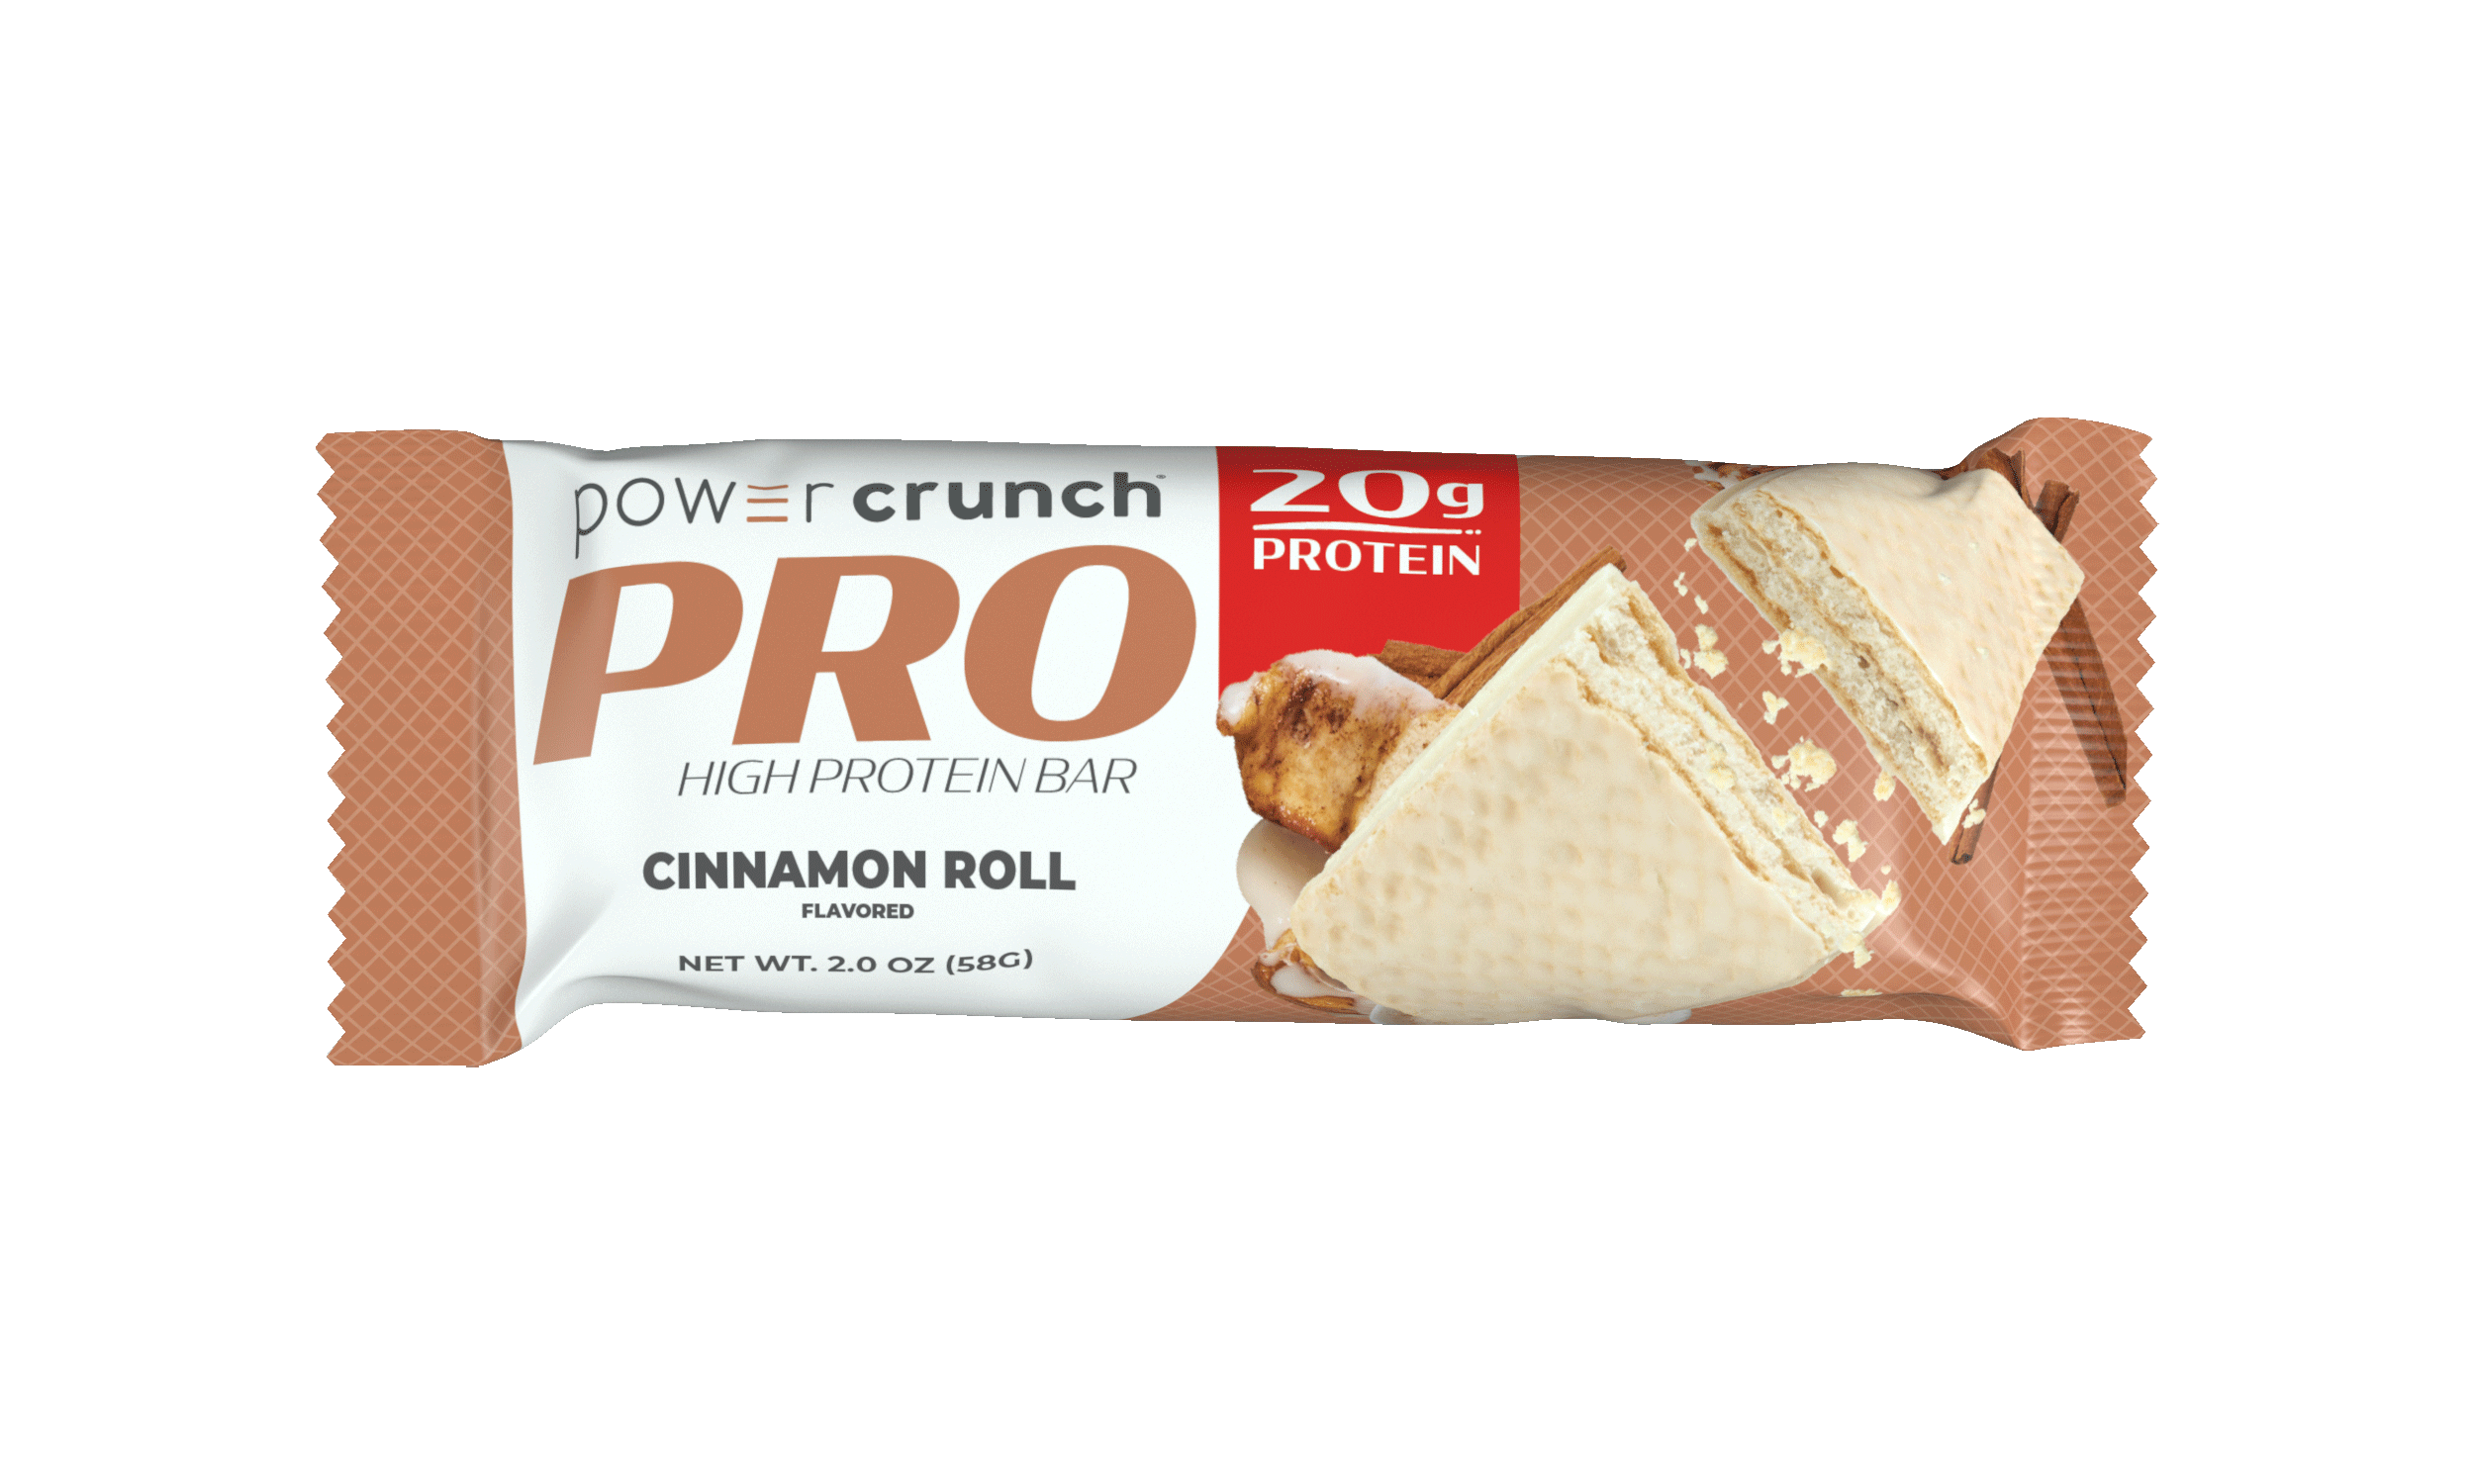 cinnamon roll high protein bars as a pre or post workout snack